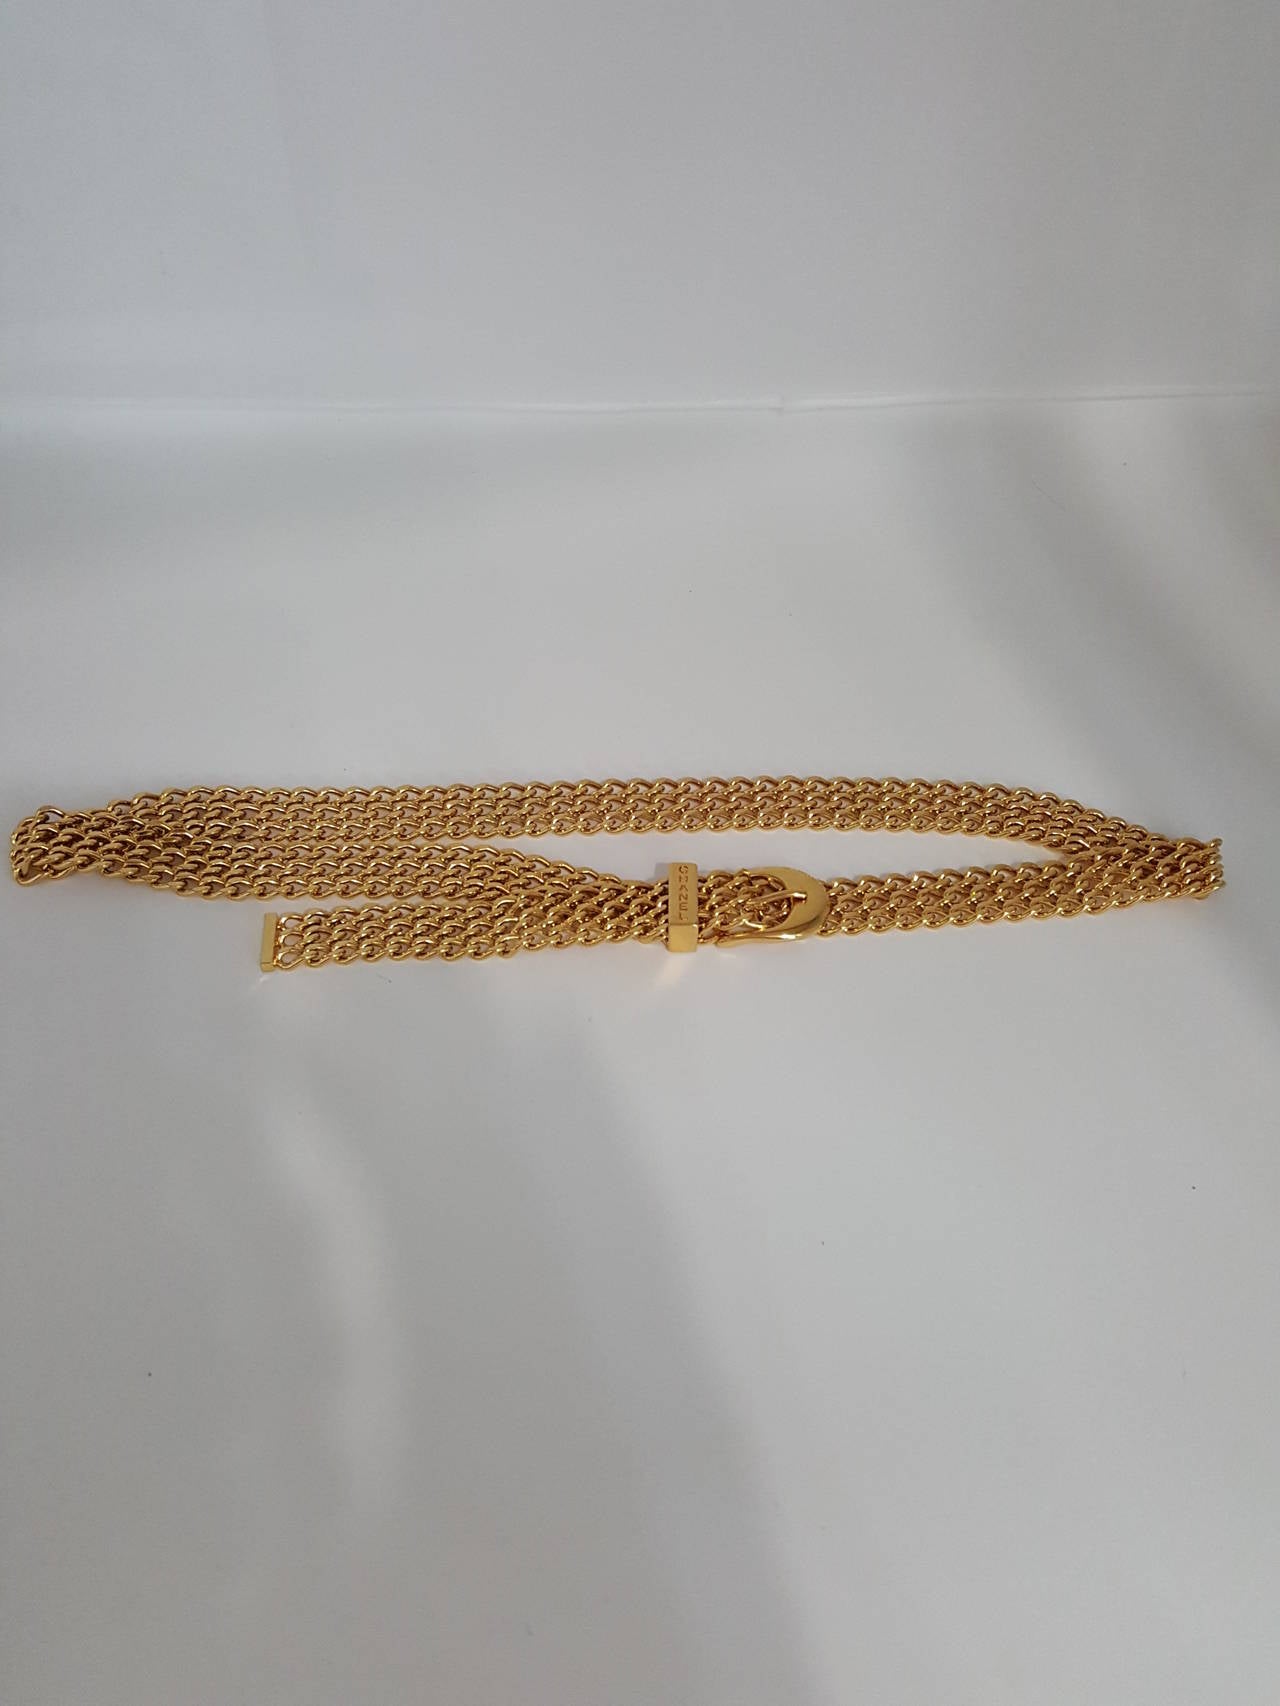 Offered for sale is this rare Chanel Woven Chain belt/necklace in bright gold finish.
This timeless piece is from 1997 and in like new condition.  It is very adjustable as you use the mesh to close the clasp.  It is 3/4 wide and it's full length is